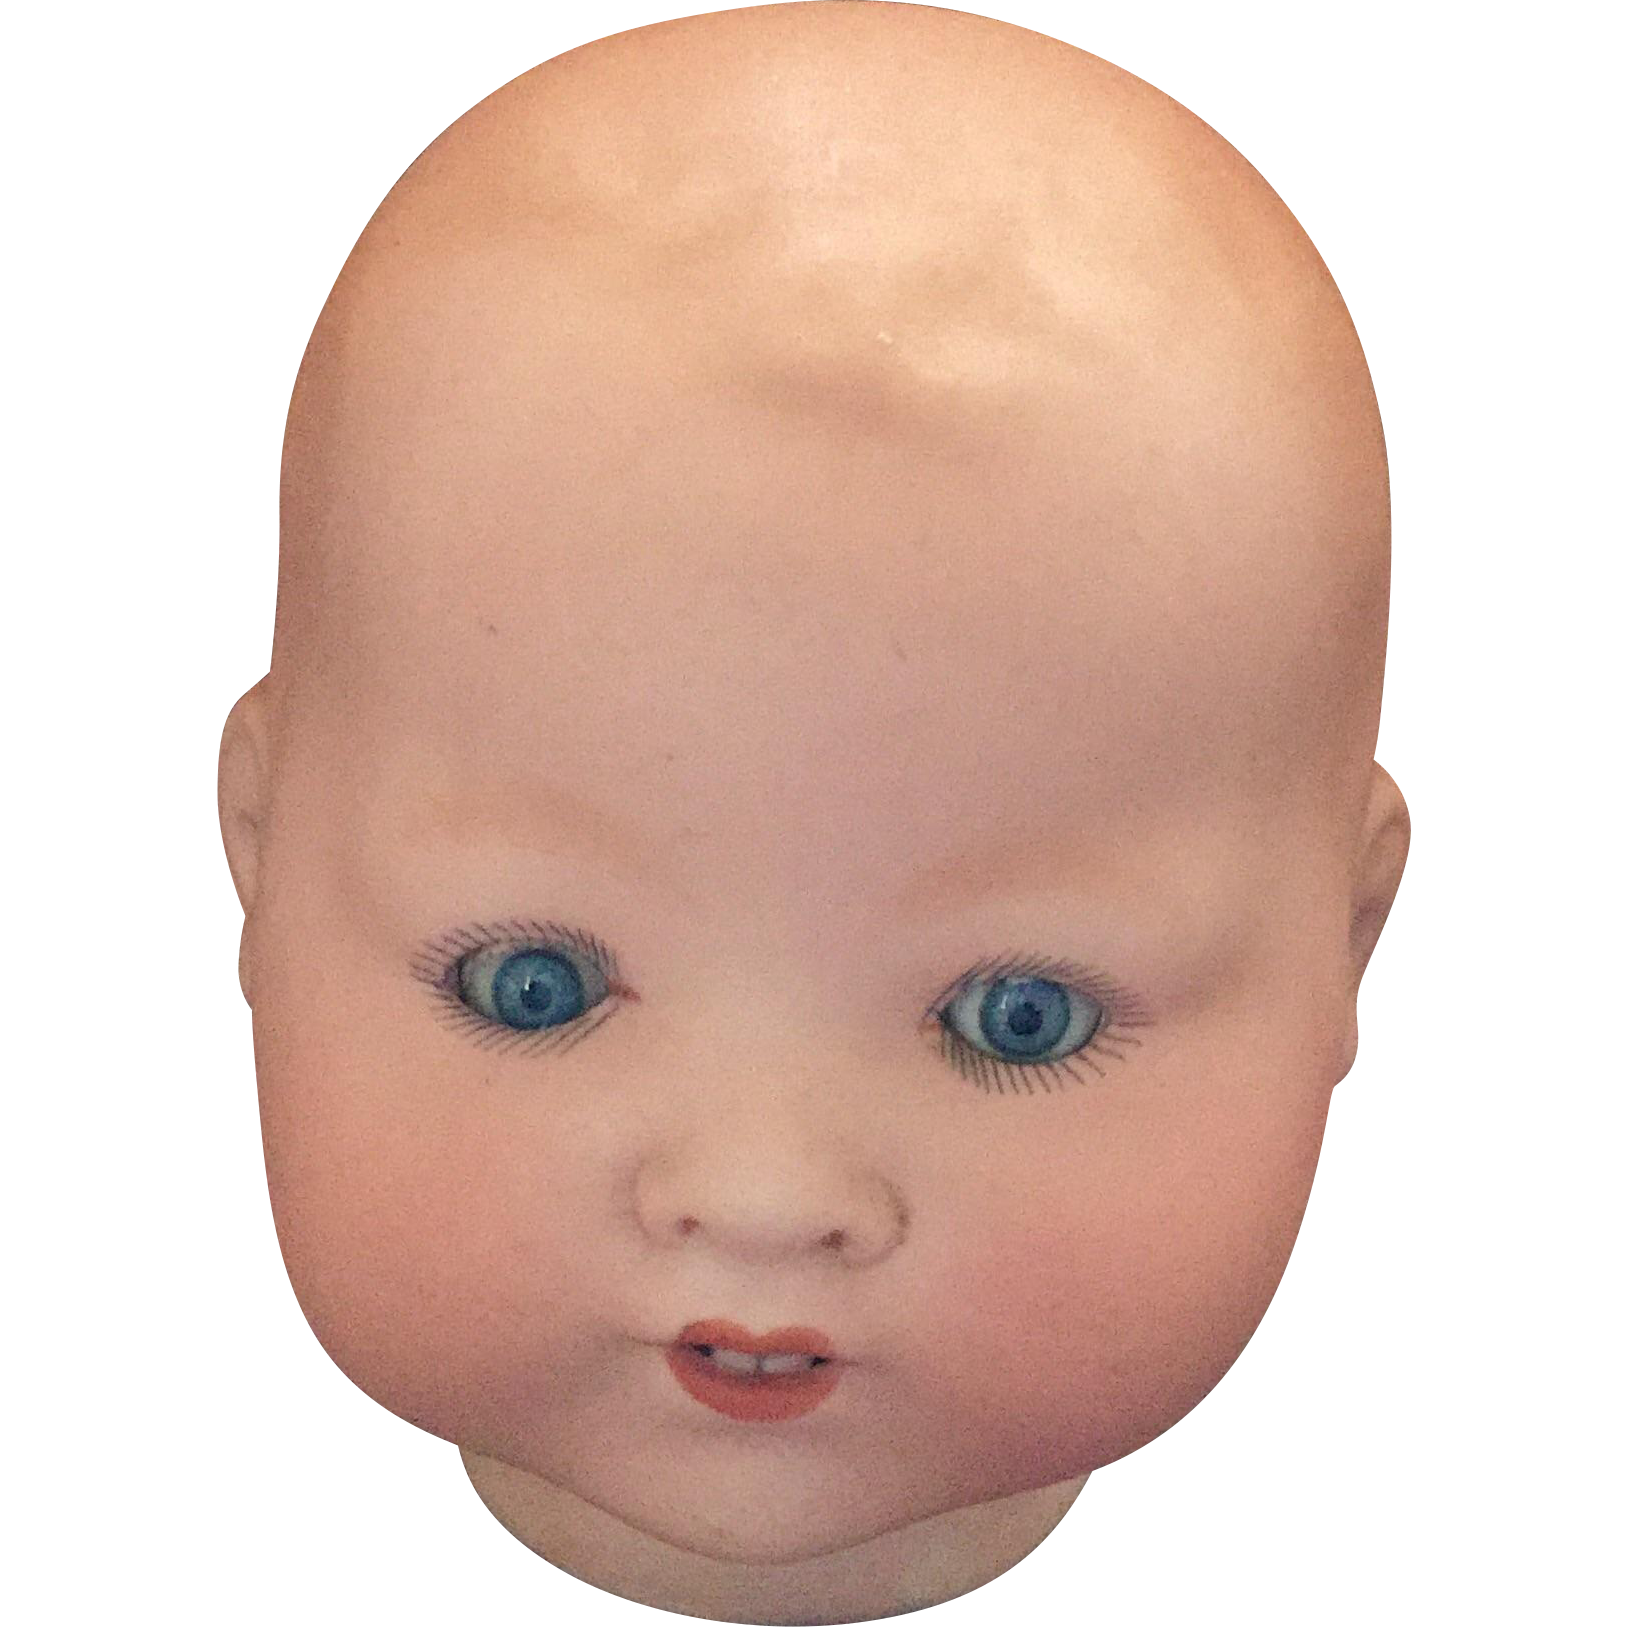 Antique German Bisque AM 351 Baby Doll Head : Hattons Gallery of ...